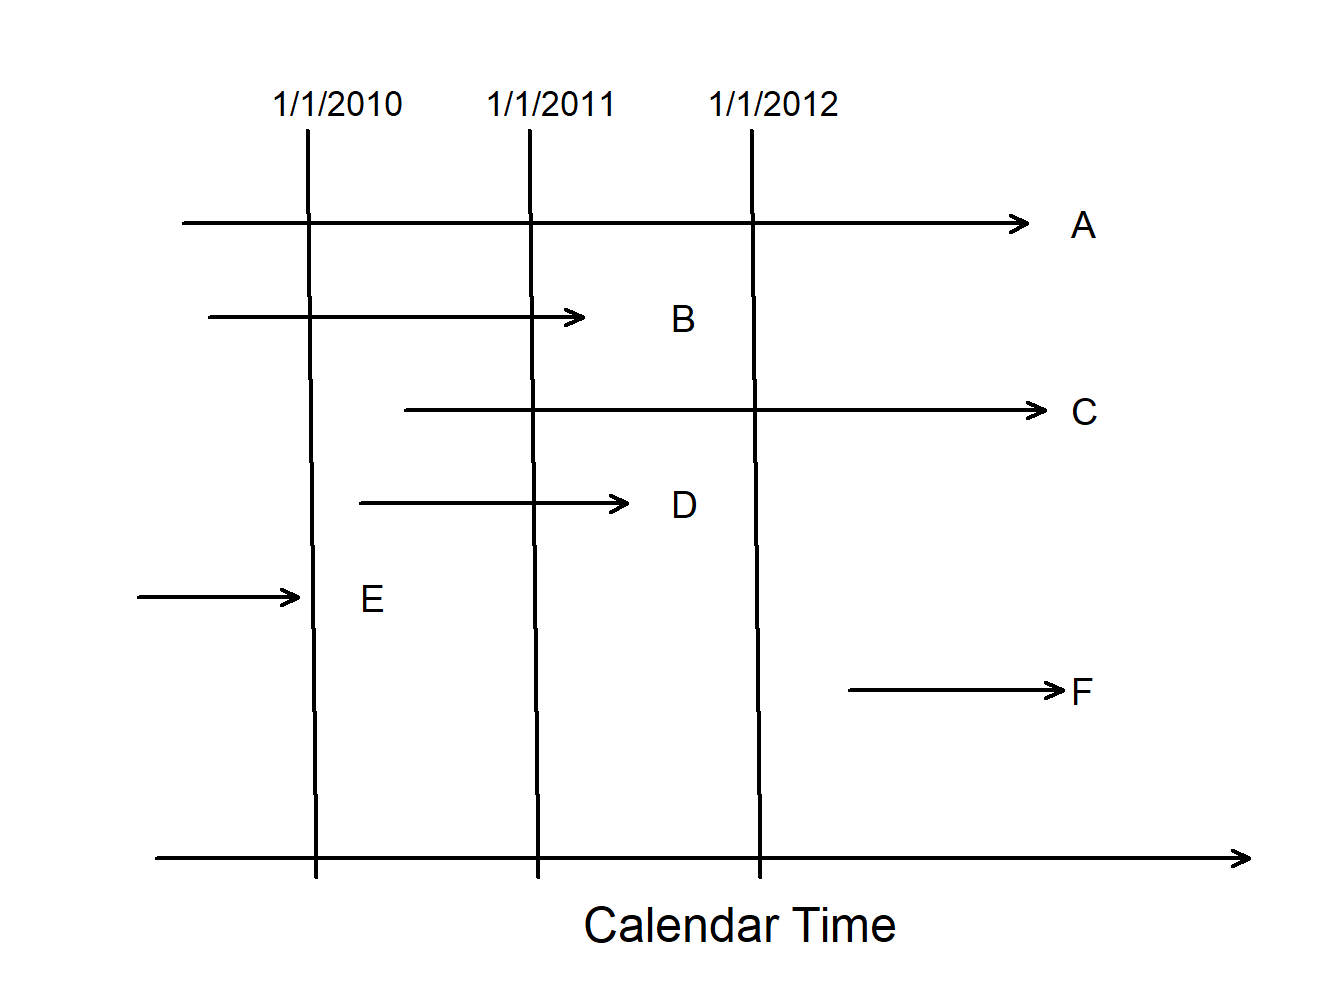 Timeline for Several Subjects on Test in a Mortality Study